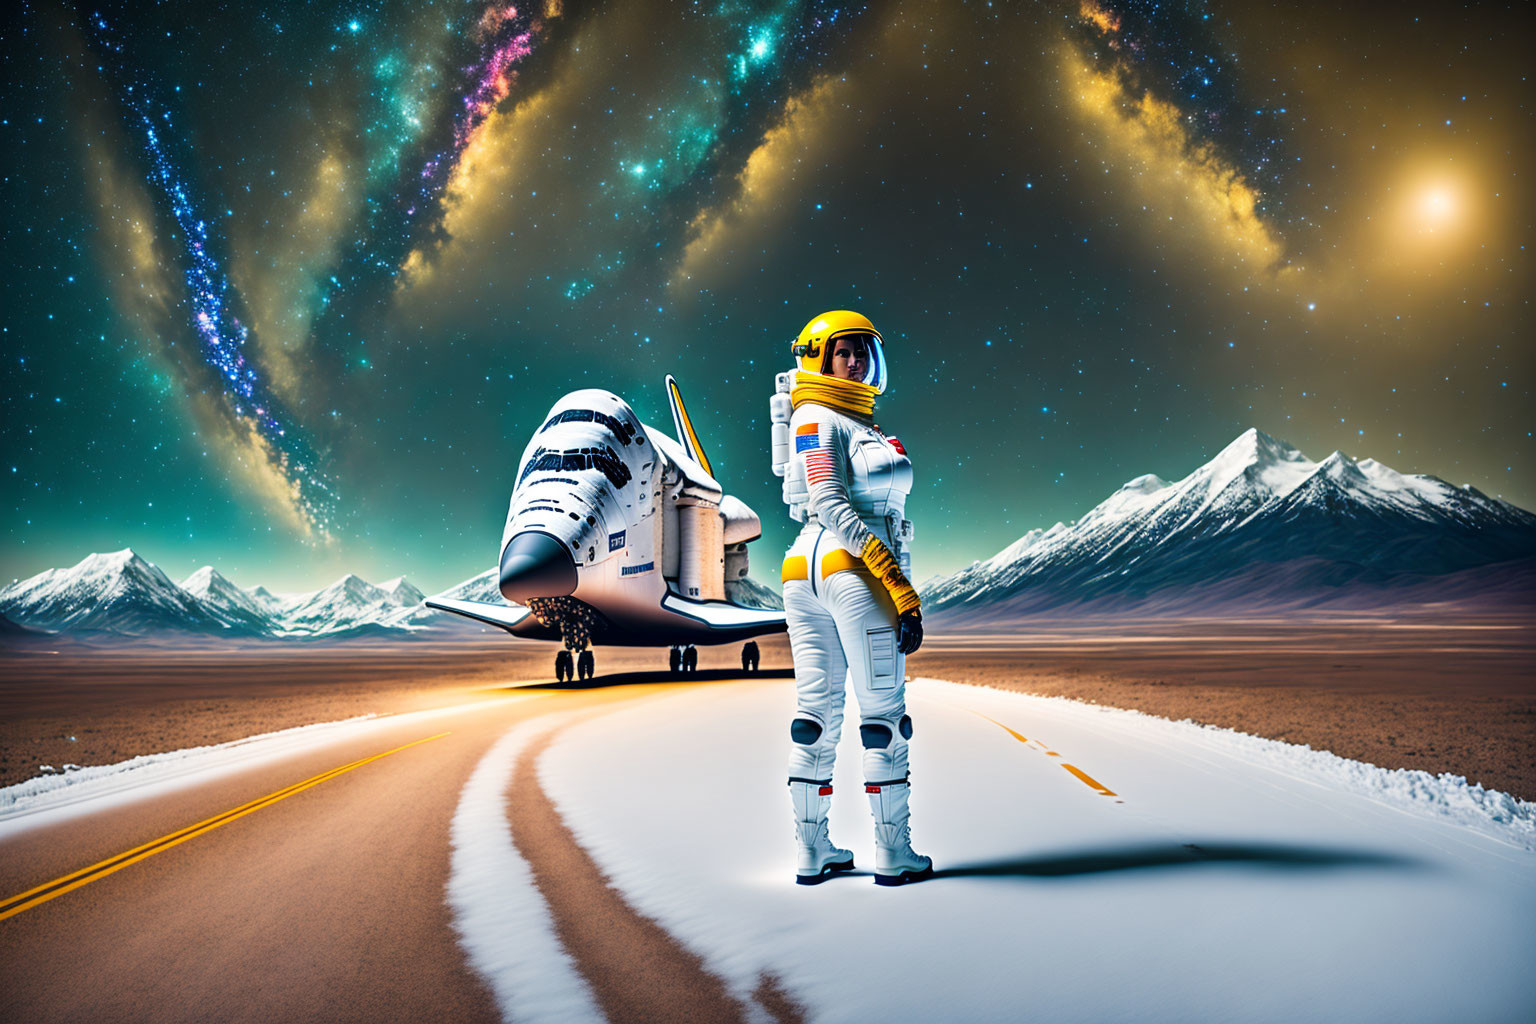 Astronaut on snowy road with space shuttle and mountains under night sky